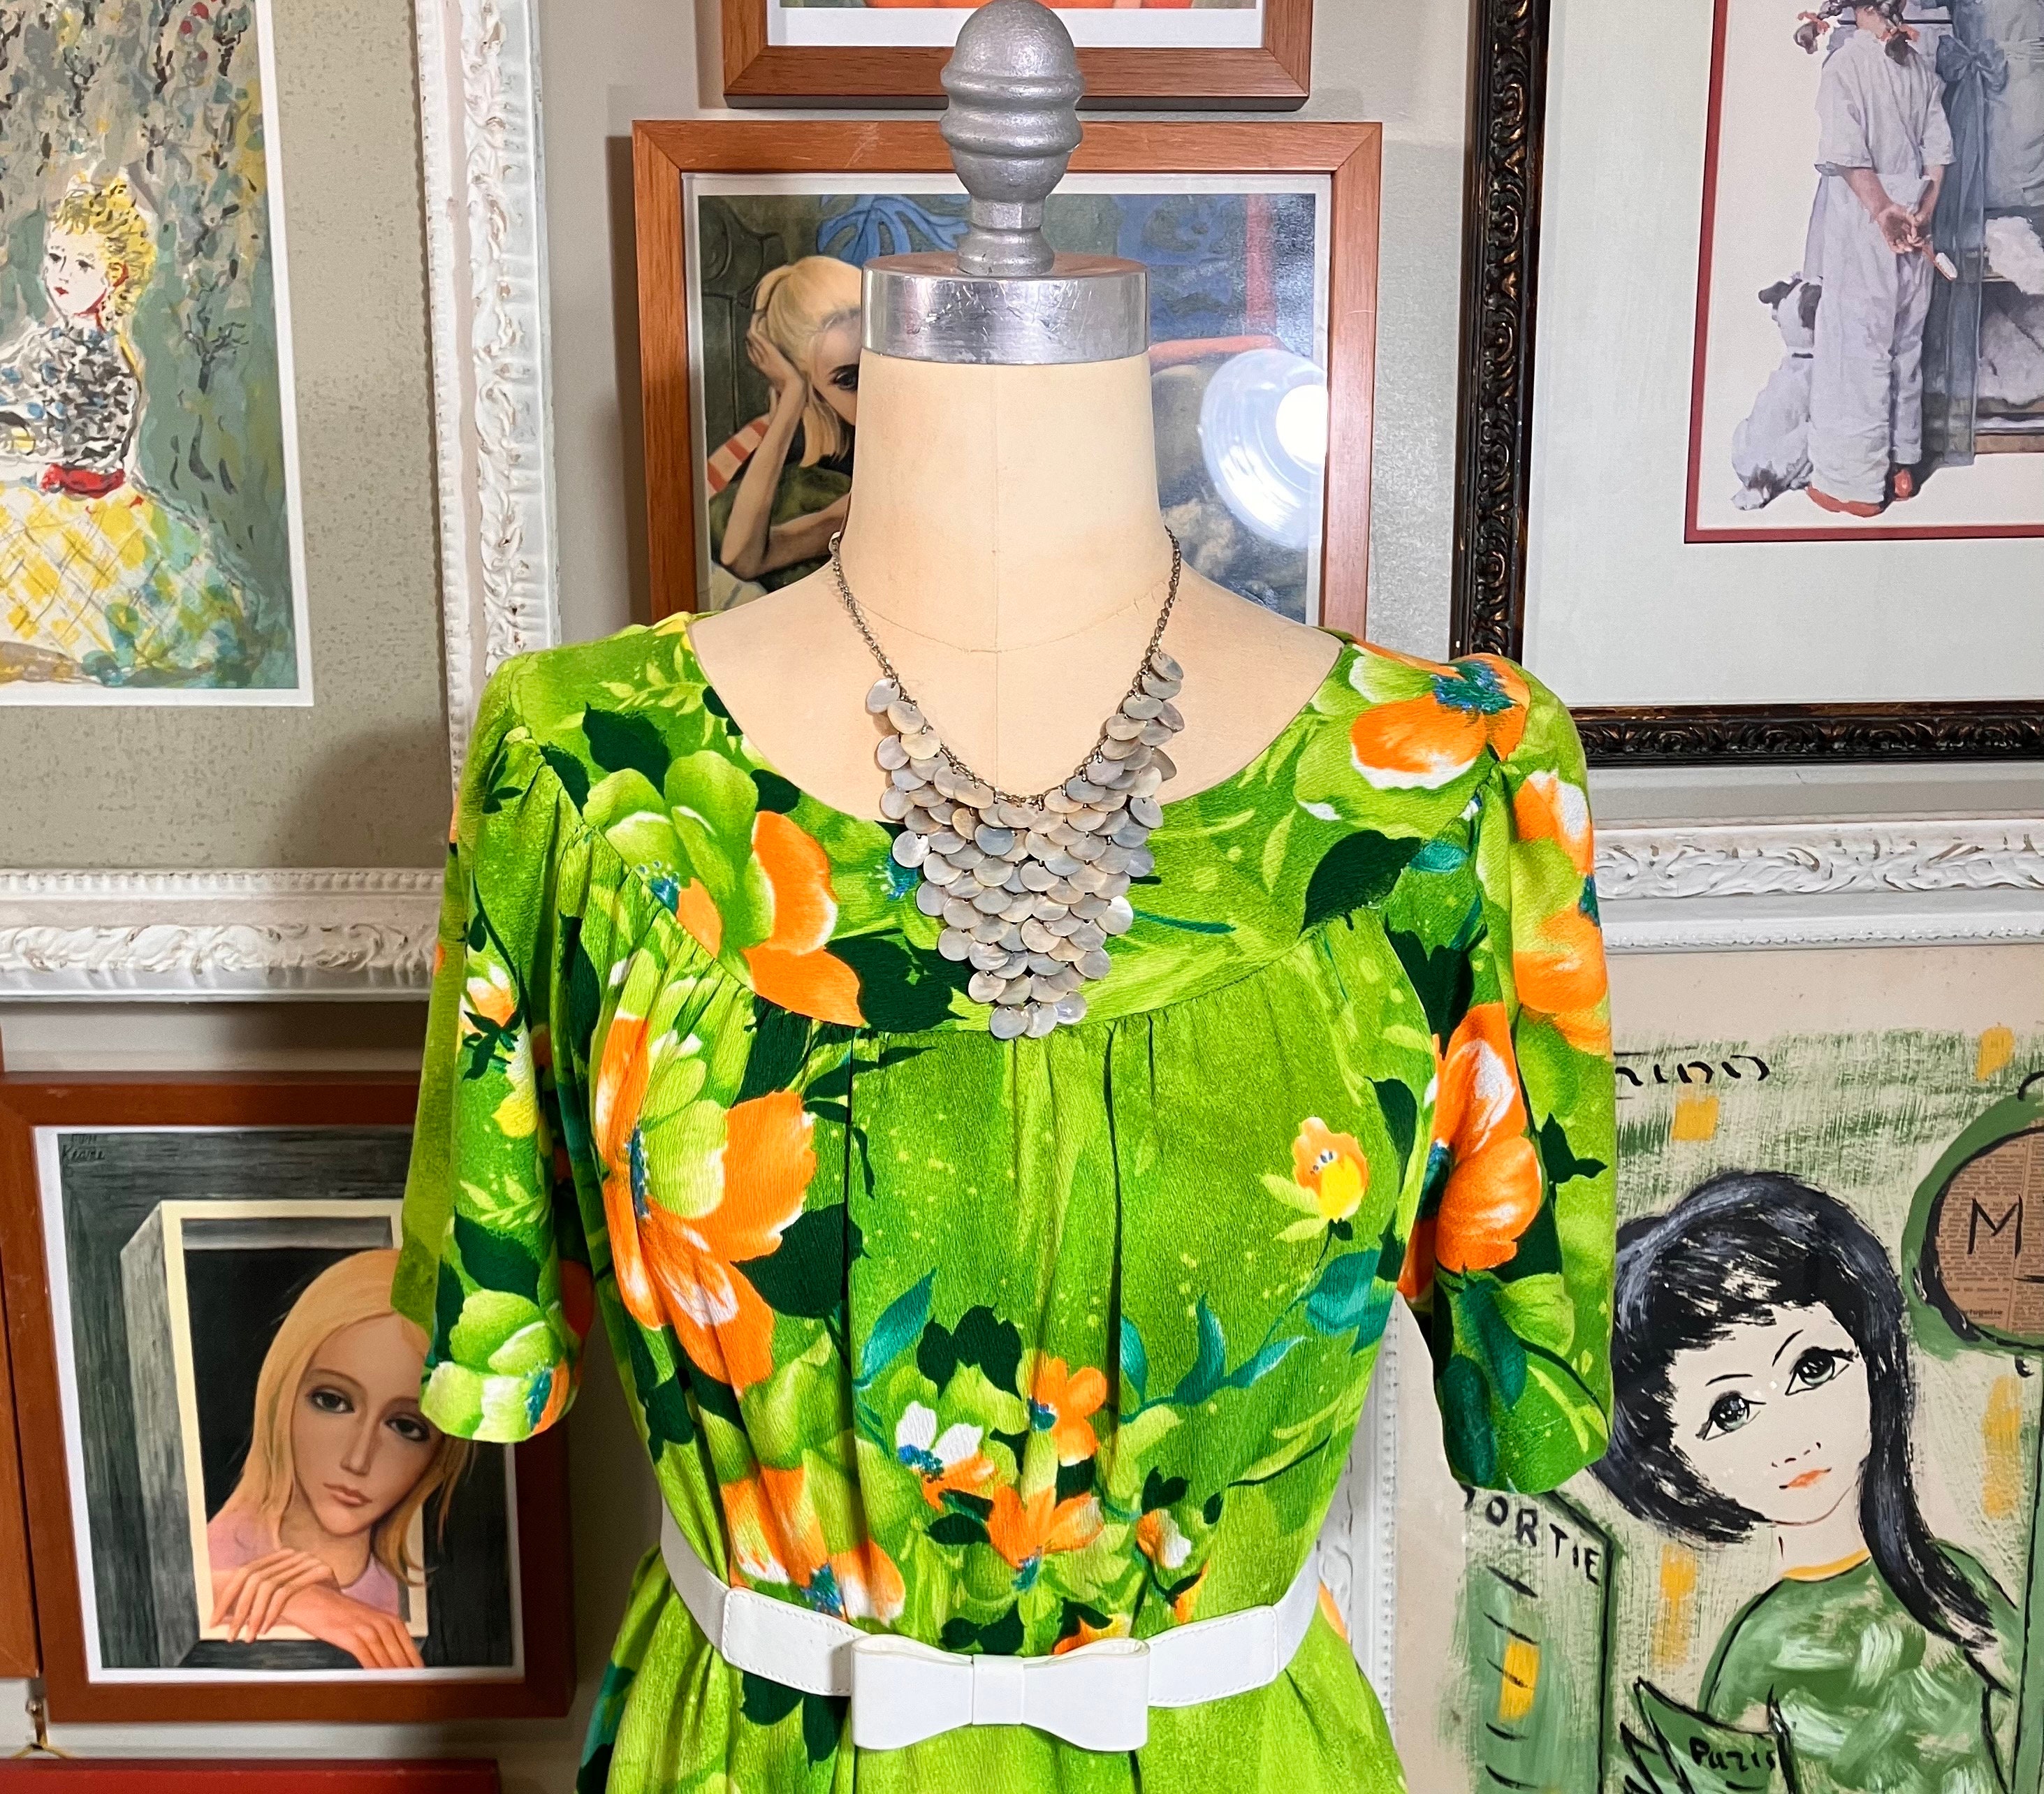 60s -70s Jewelry – Necklaces, Earrings, Rings, Bracelets 1960s Hawaiian Floral Print Shift Dress $69.00 AT vintagedancer.com